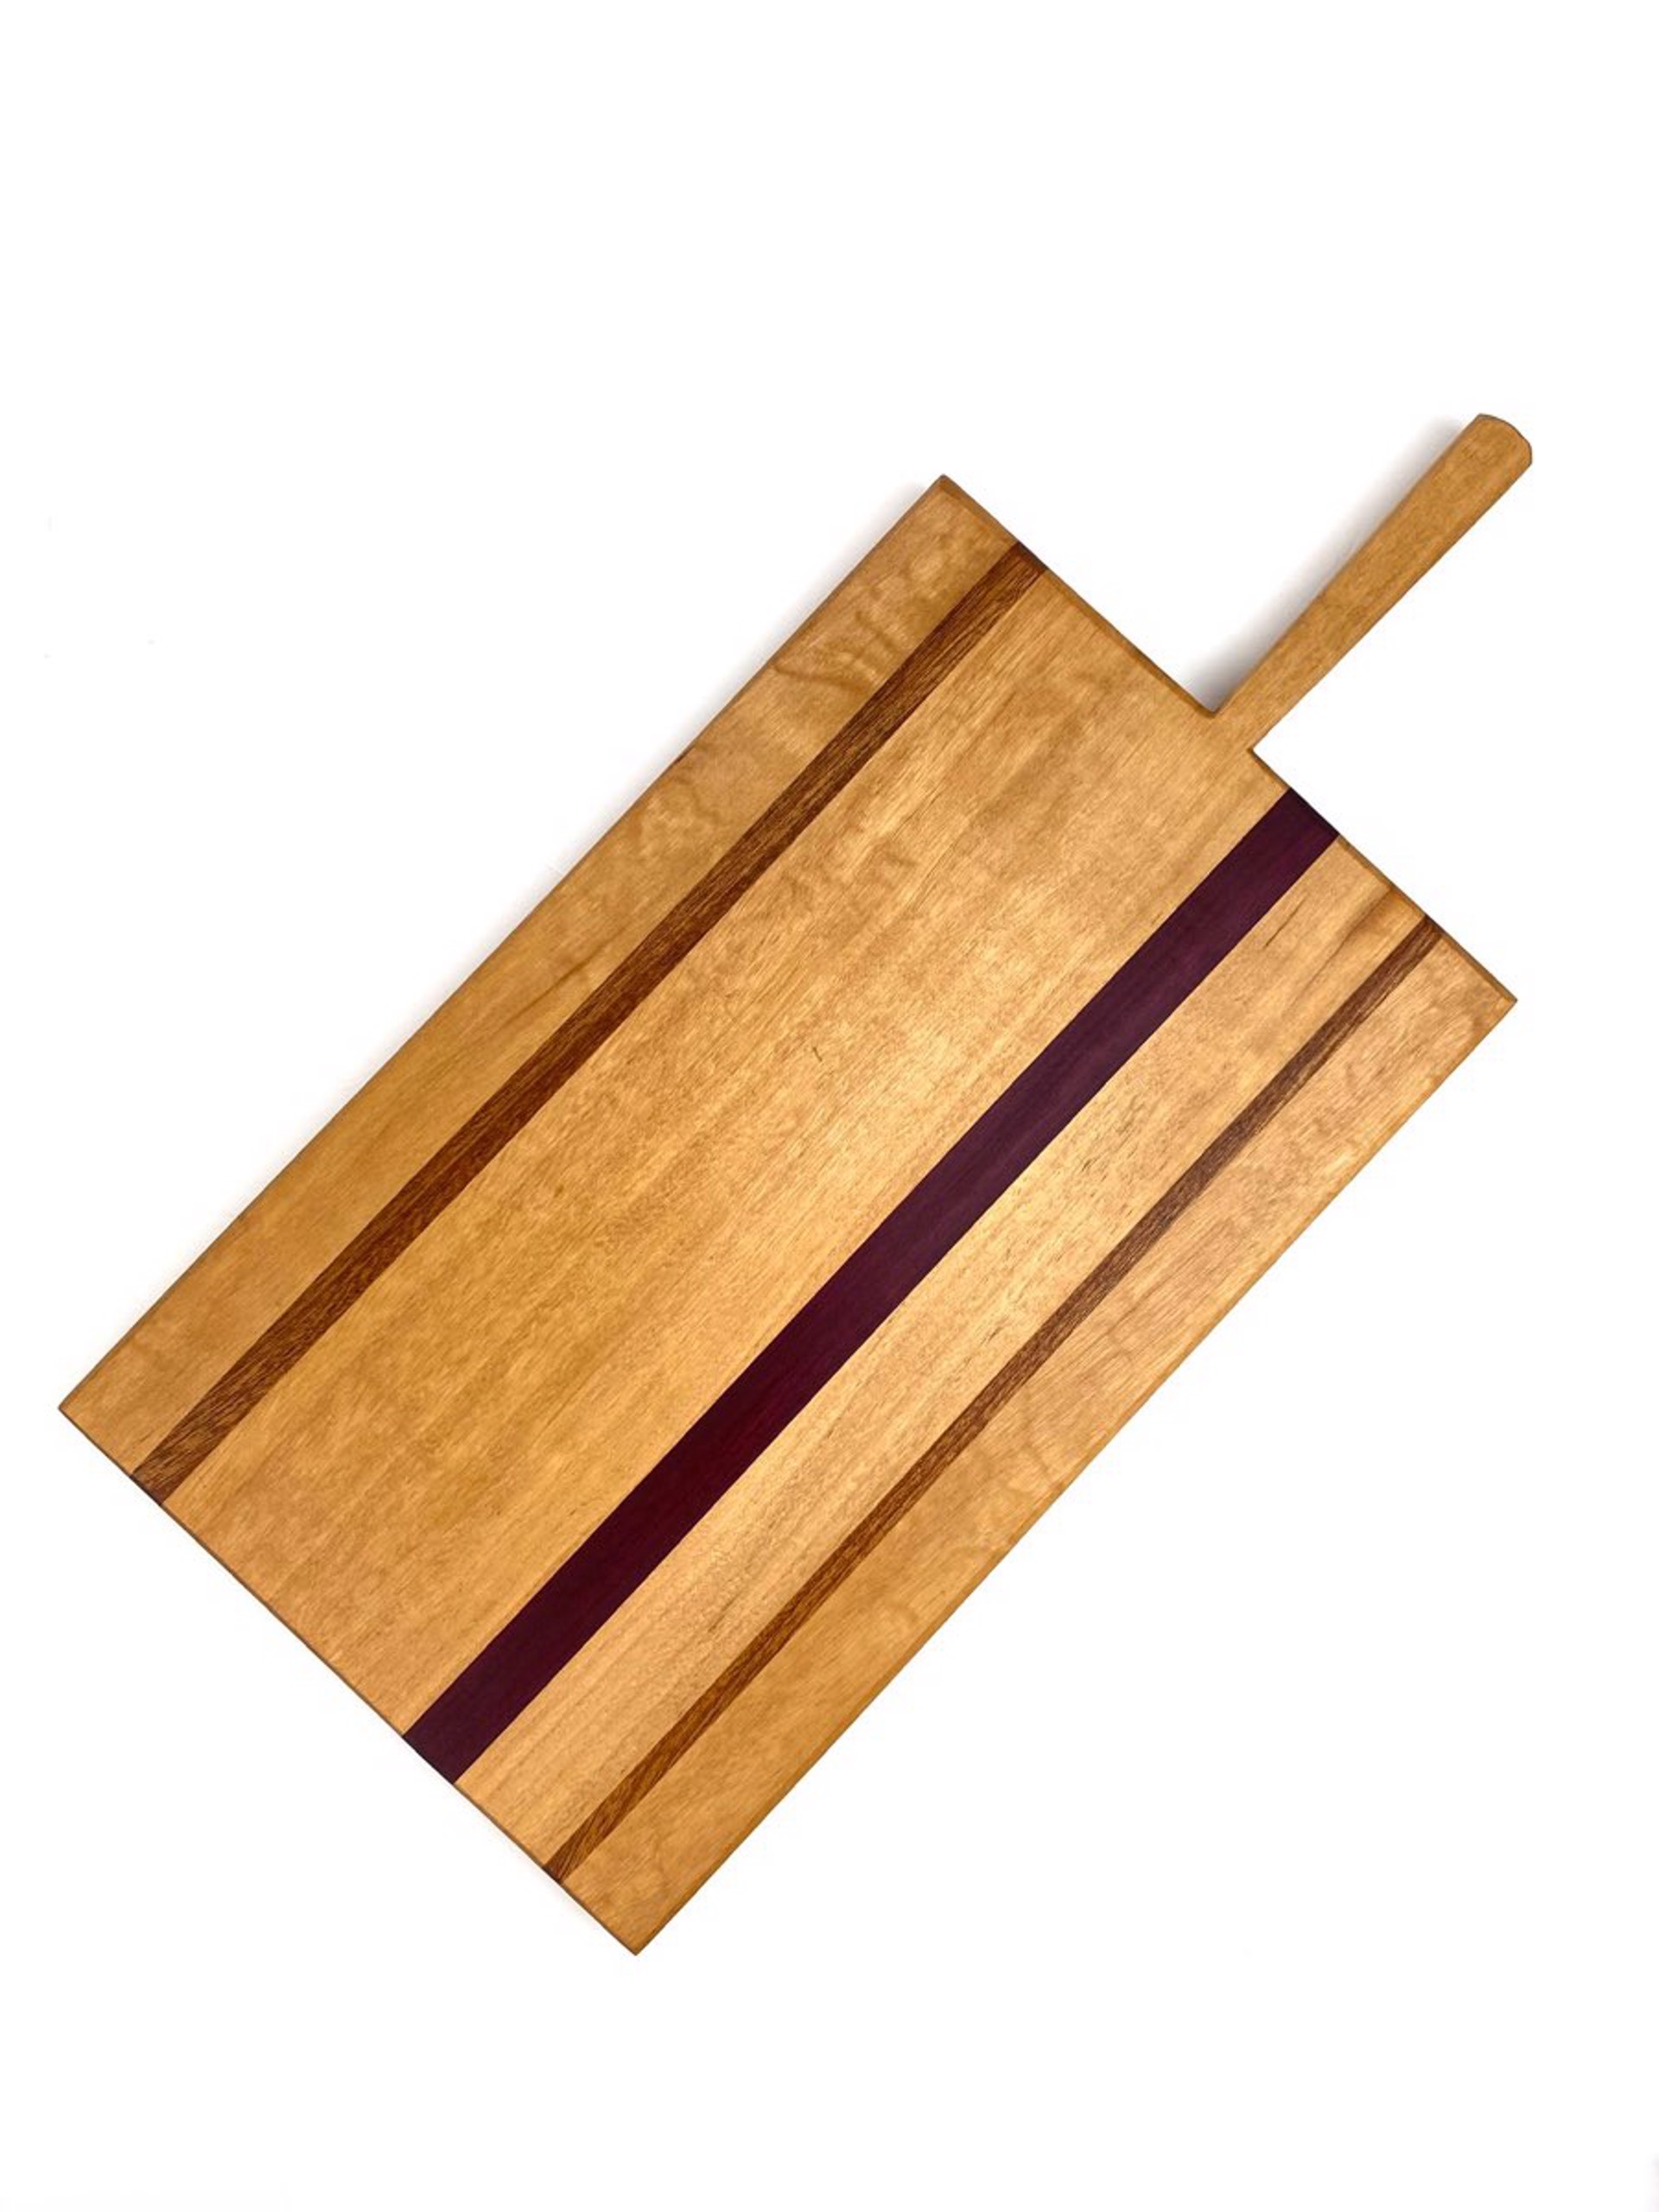 Birch Board with Handle by Jon Cordes